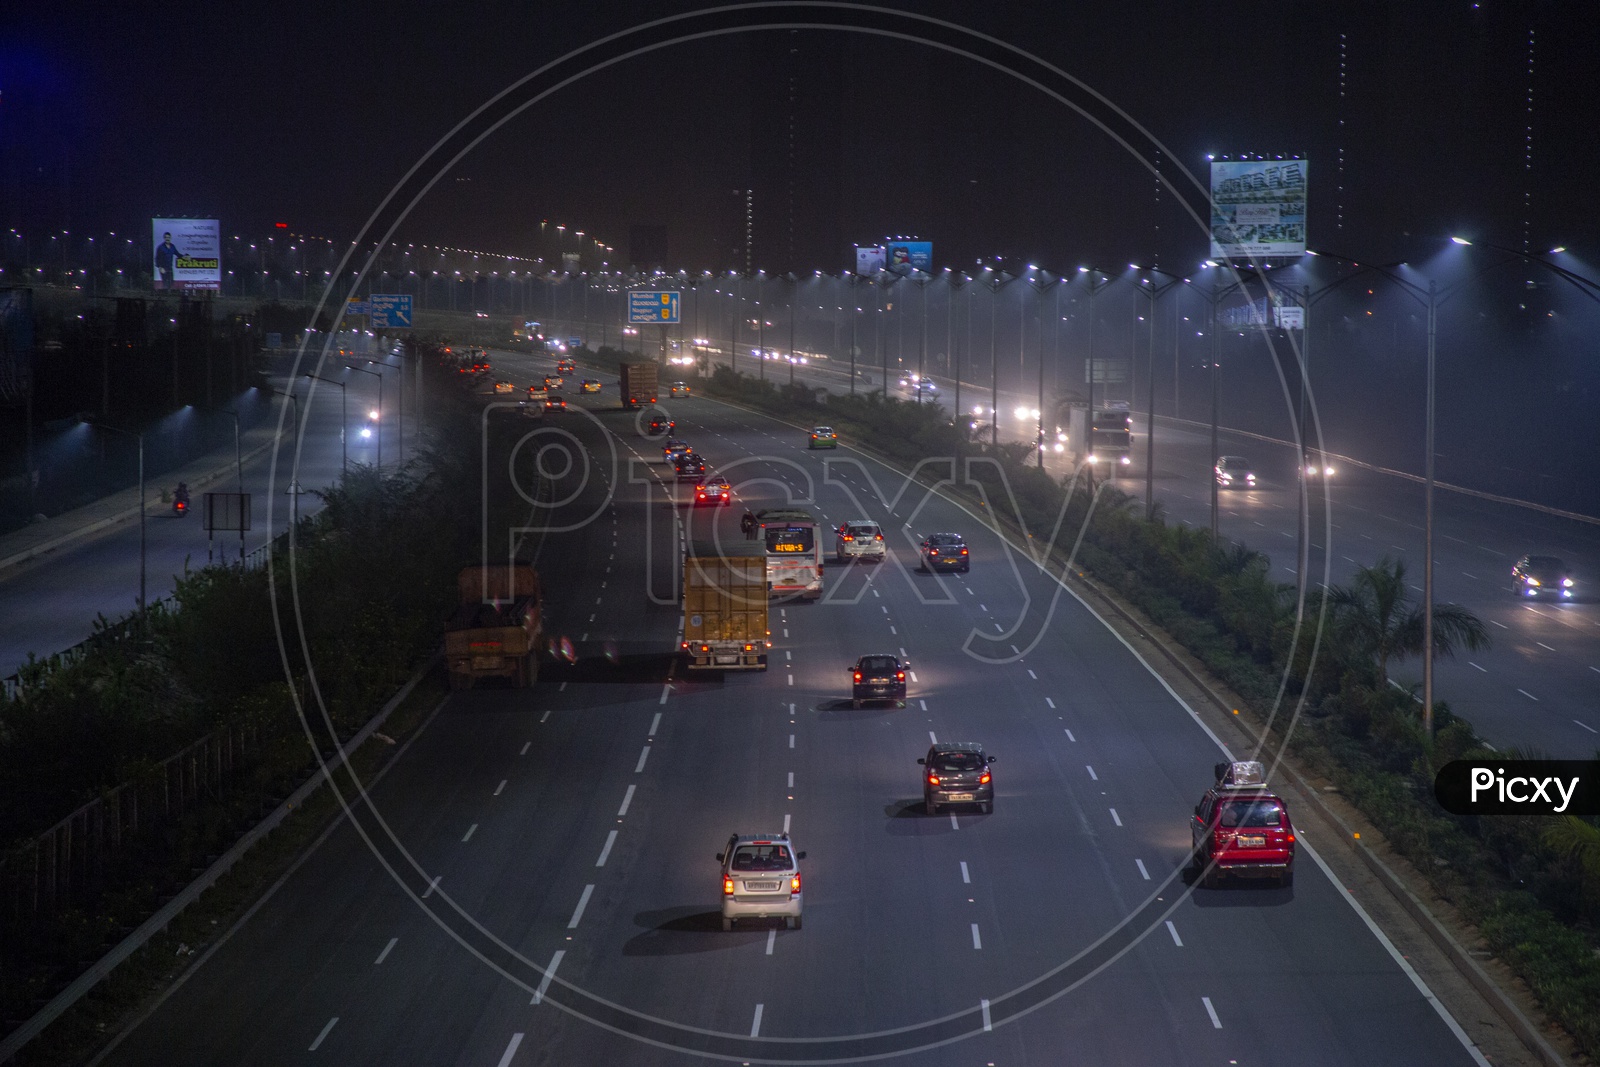 outer ring road